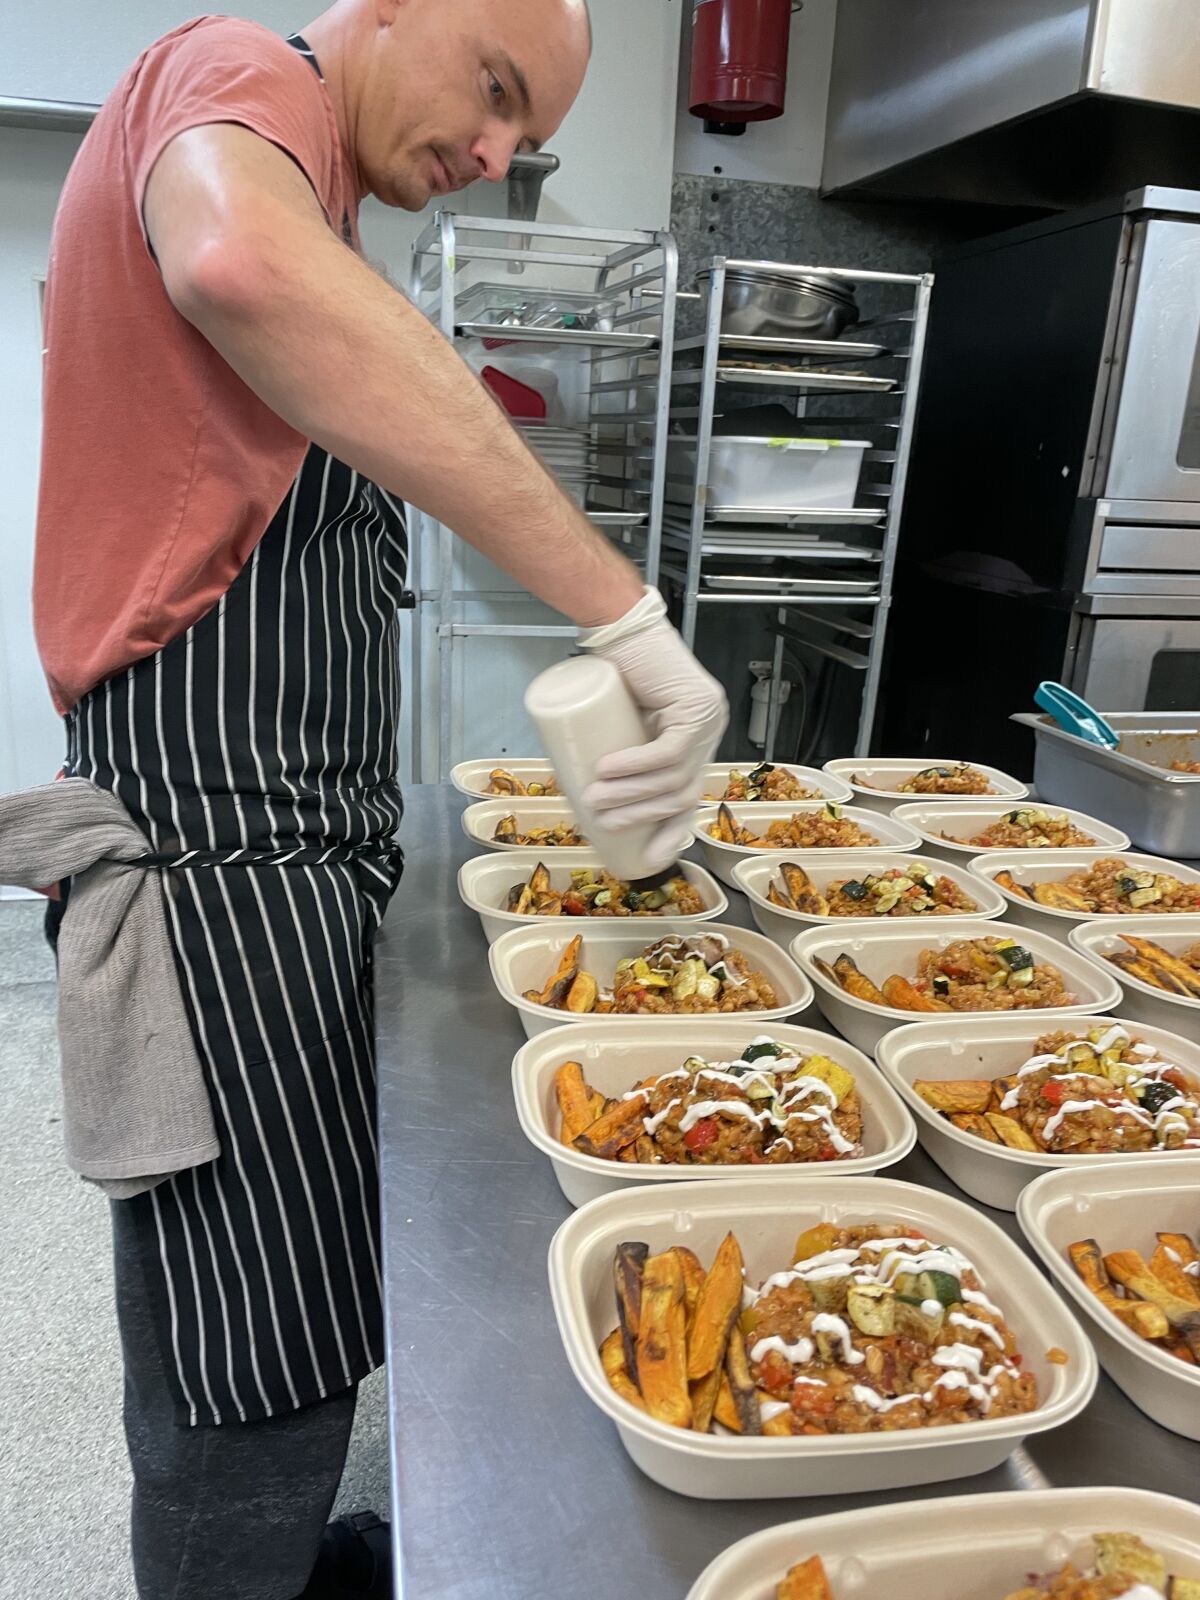 Chef and La Jolla resident Alec Hurley prepares meals for the Deeply Nourished food delivery service.